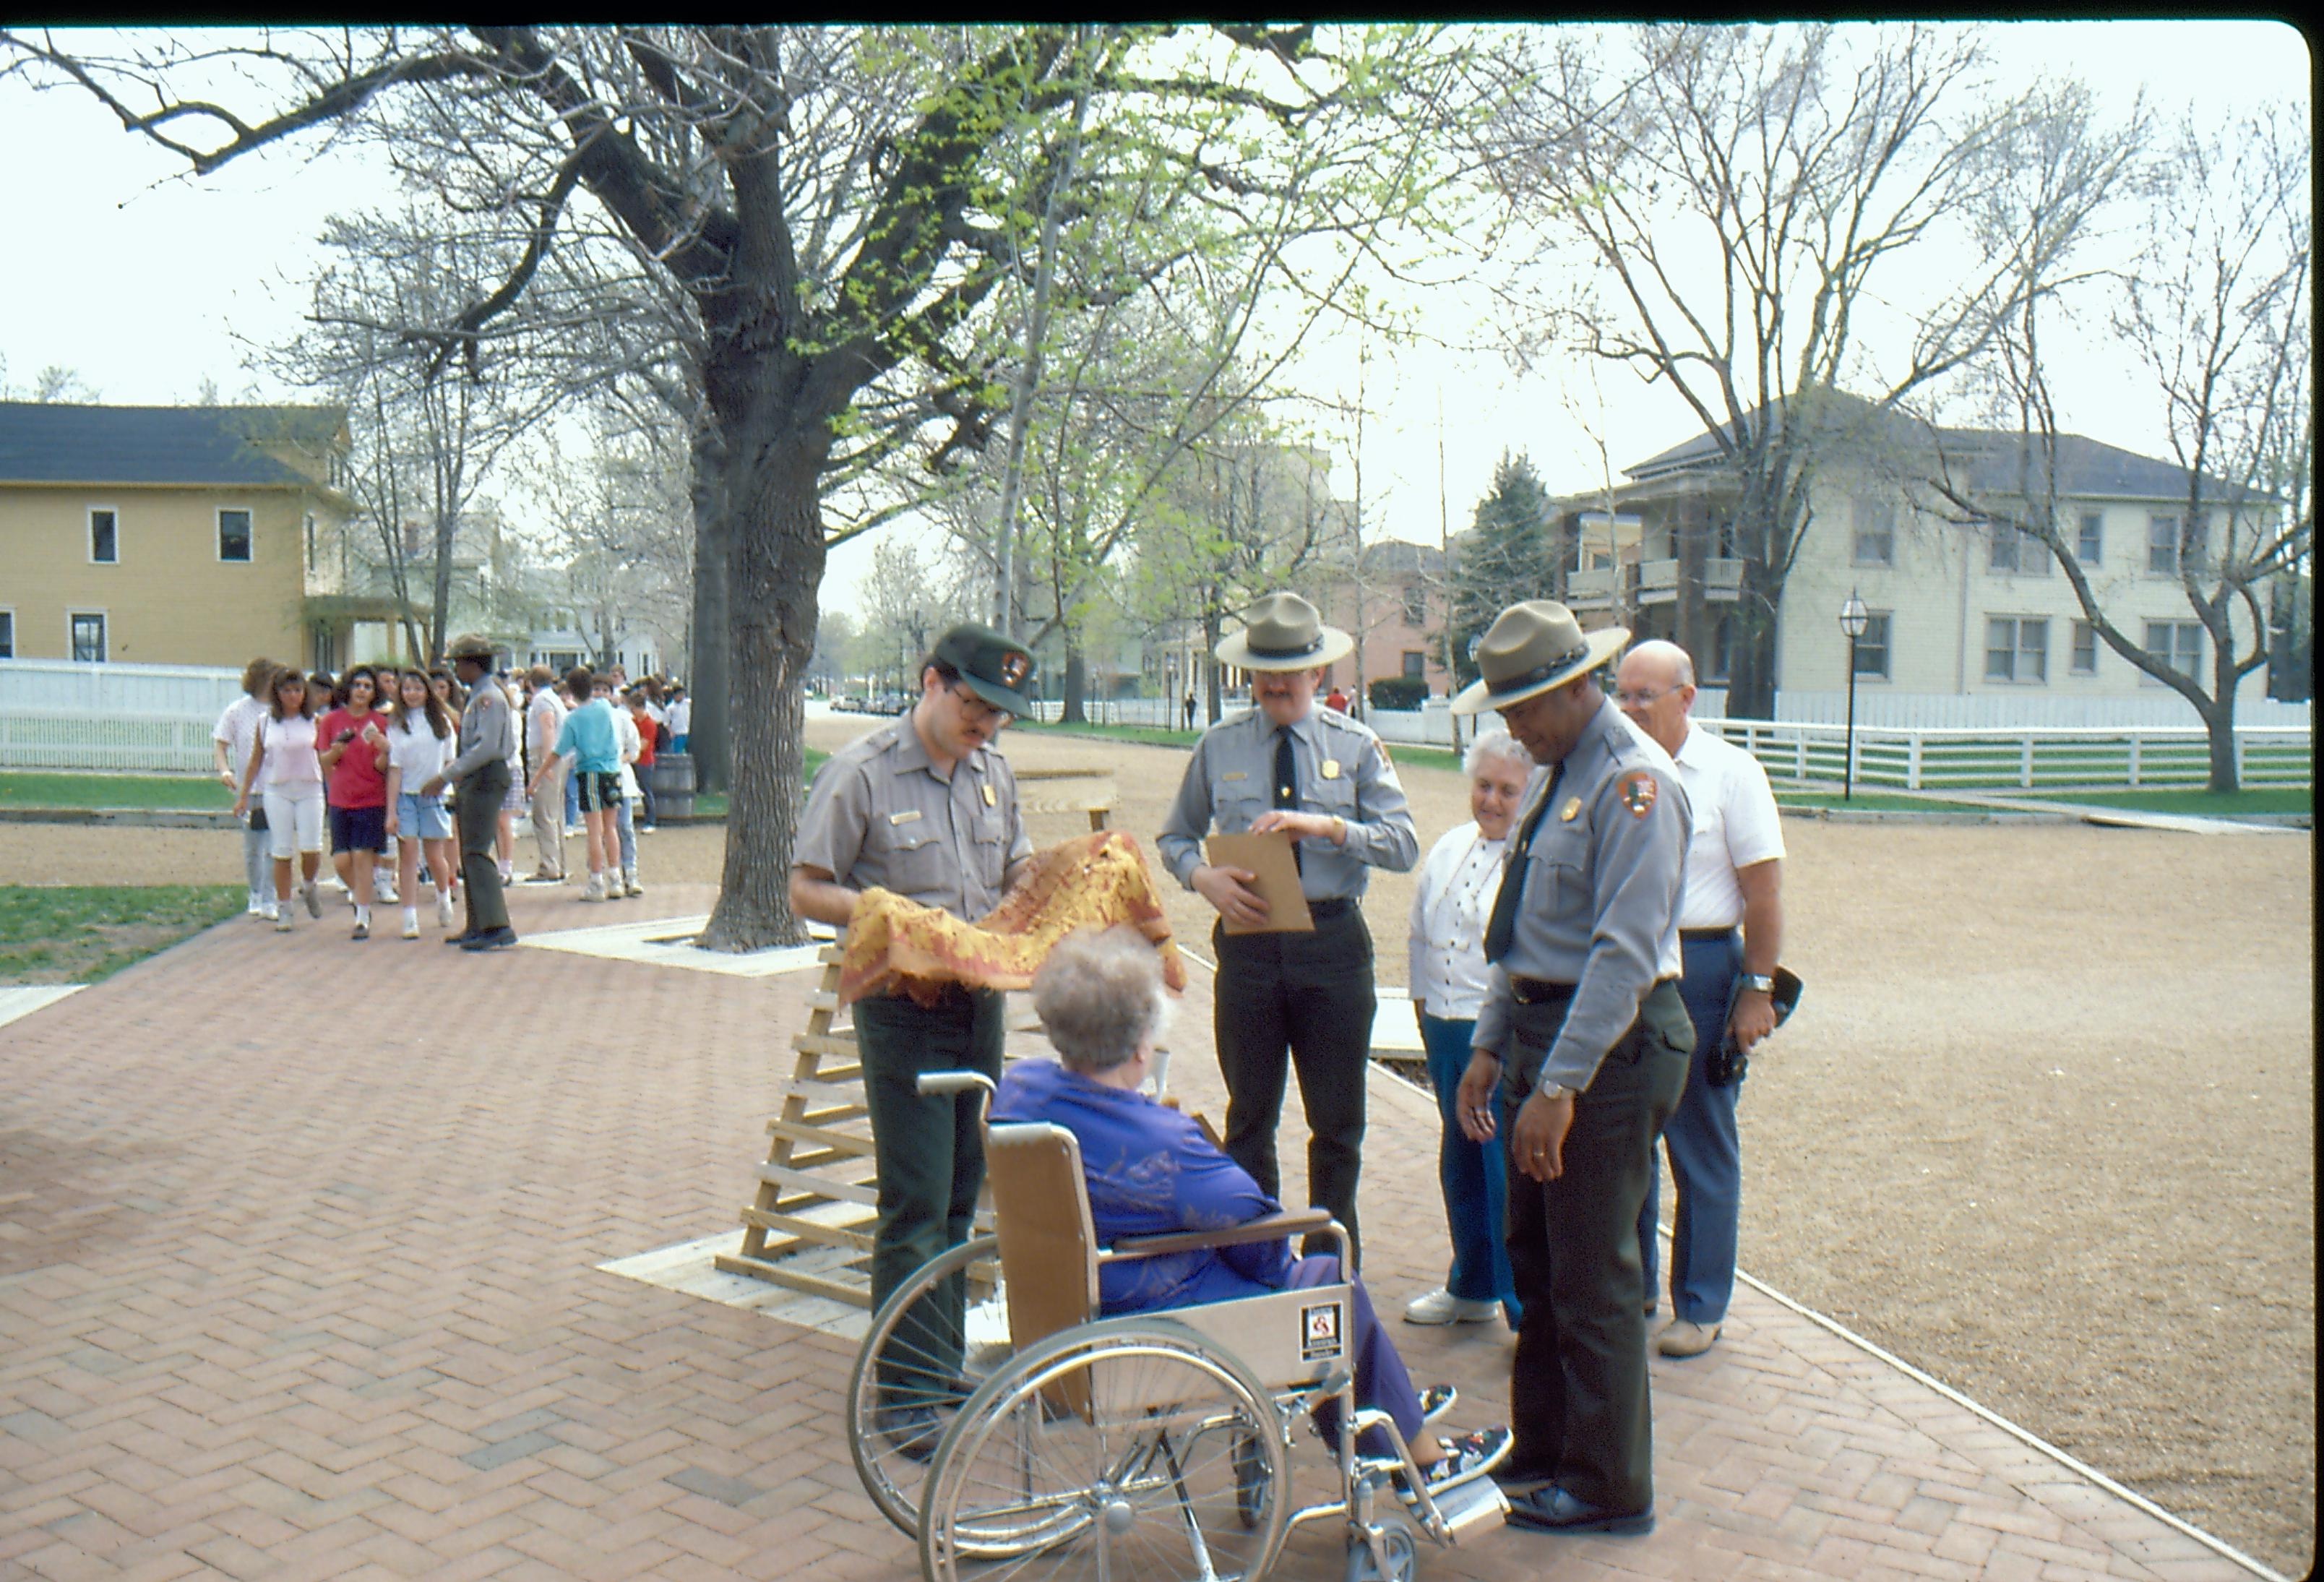 Three rangers, with fourth in background, assist a visitor using a wheelchair in front of the Lincoln Home. Cook house in background left, with pre-restoration Sprigg in background, right. Photographer facing south.